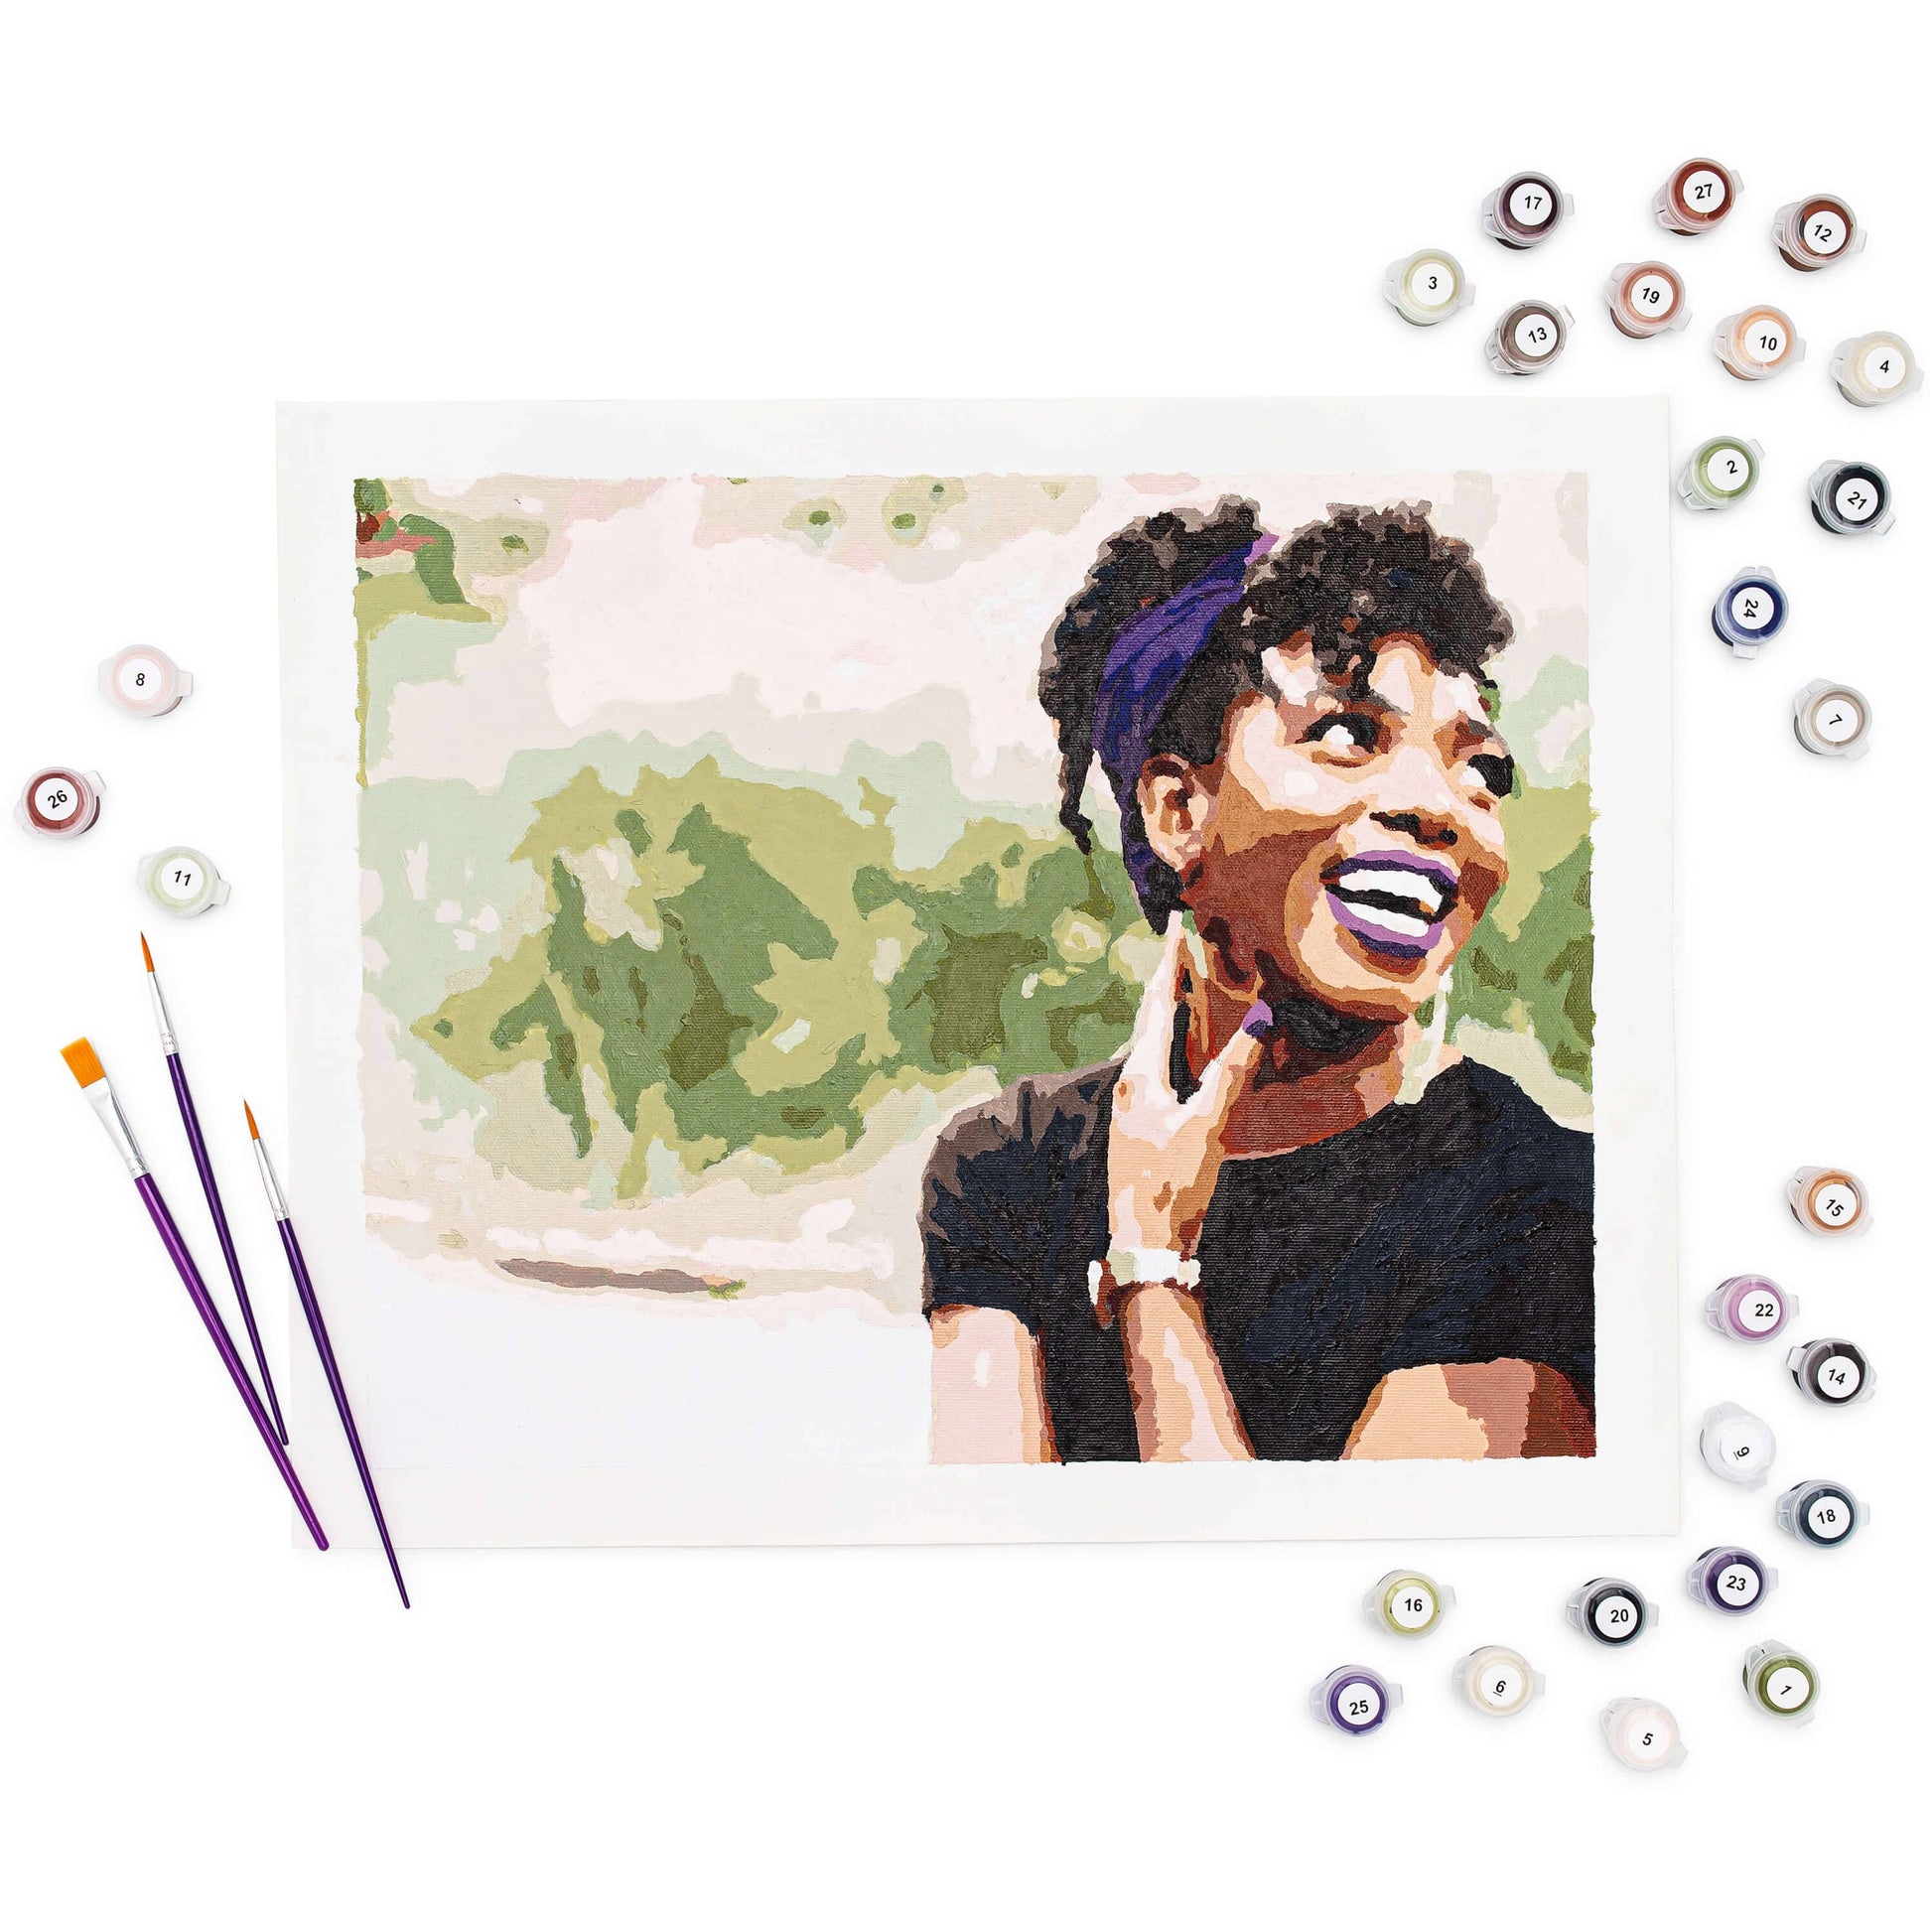 Personalized Custom Paint By Numbers Kit - Upload Your Favorite Photo